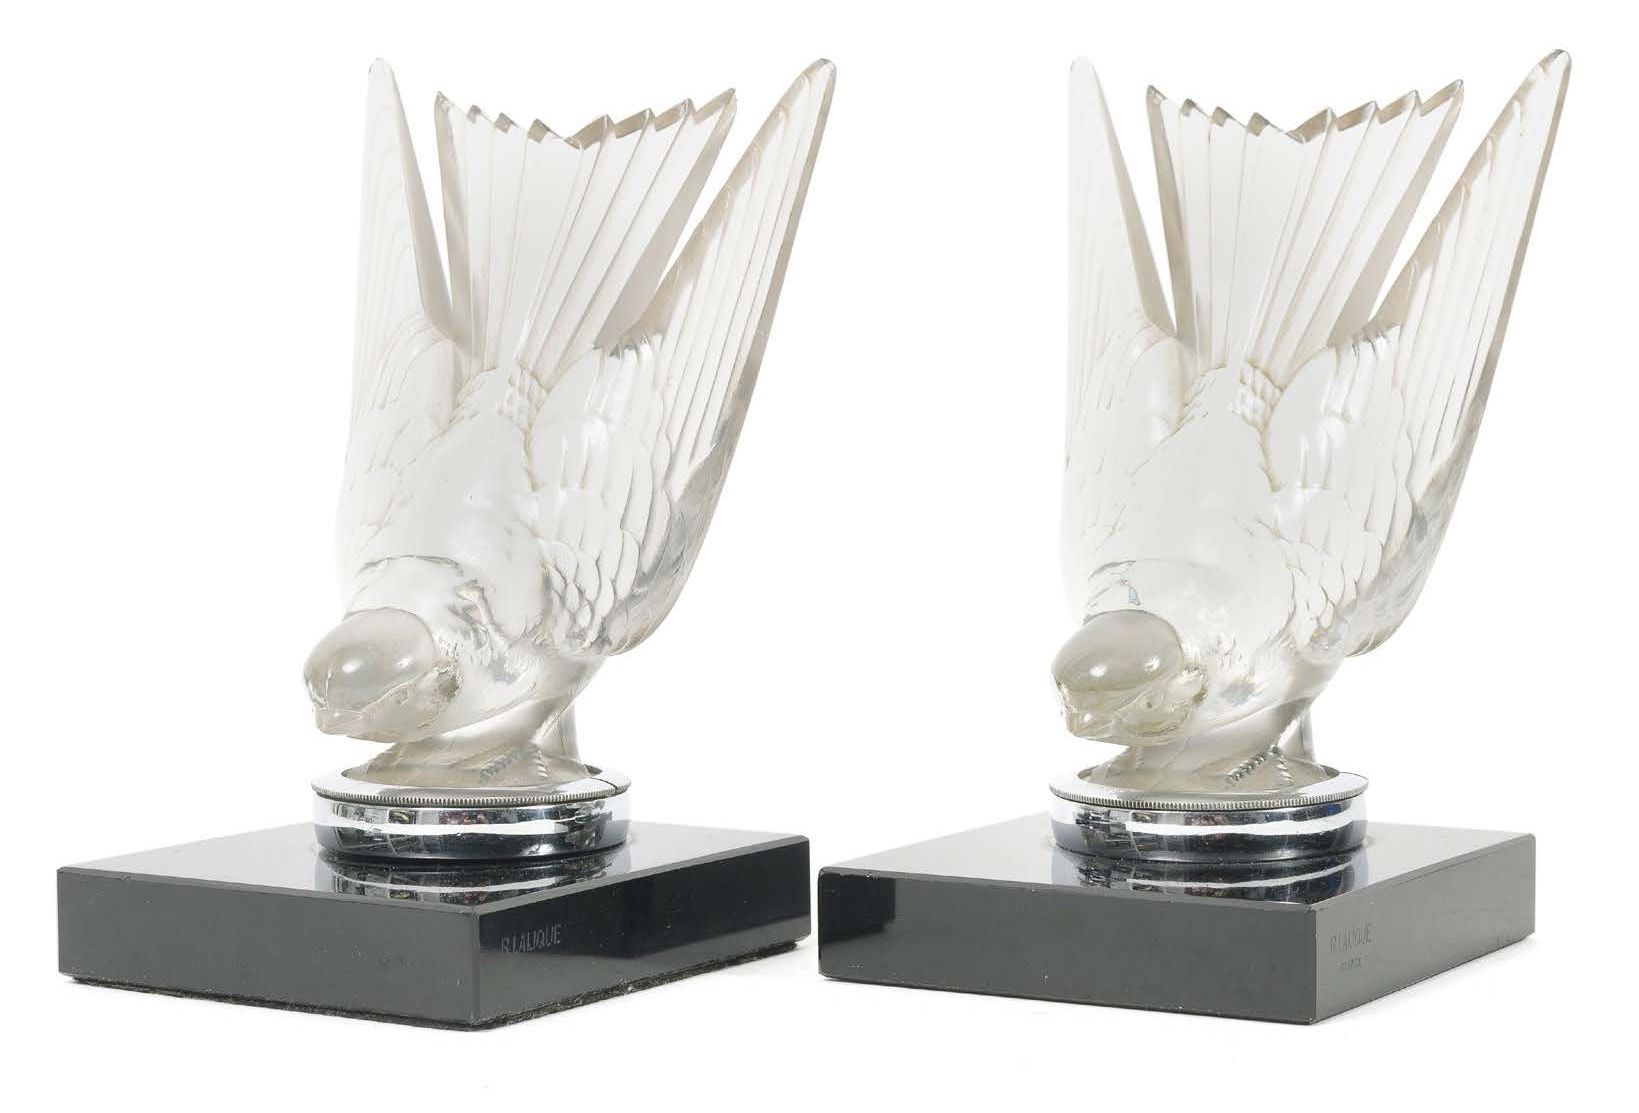 RENE LALIQUE (1860-1945) 
Pair of Hirondelles bookends.
Model created in 1928.
P&hellip;